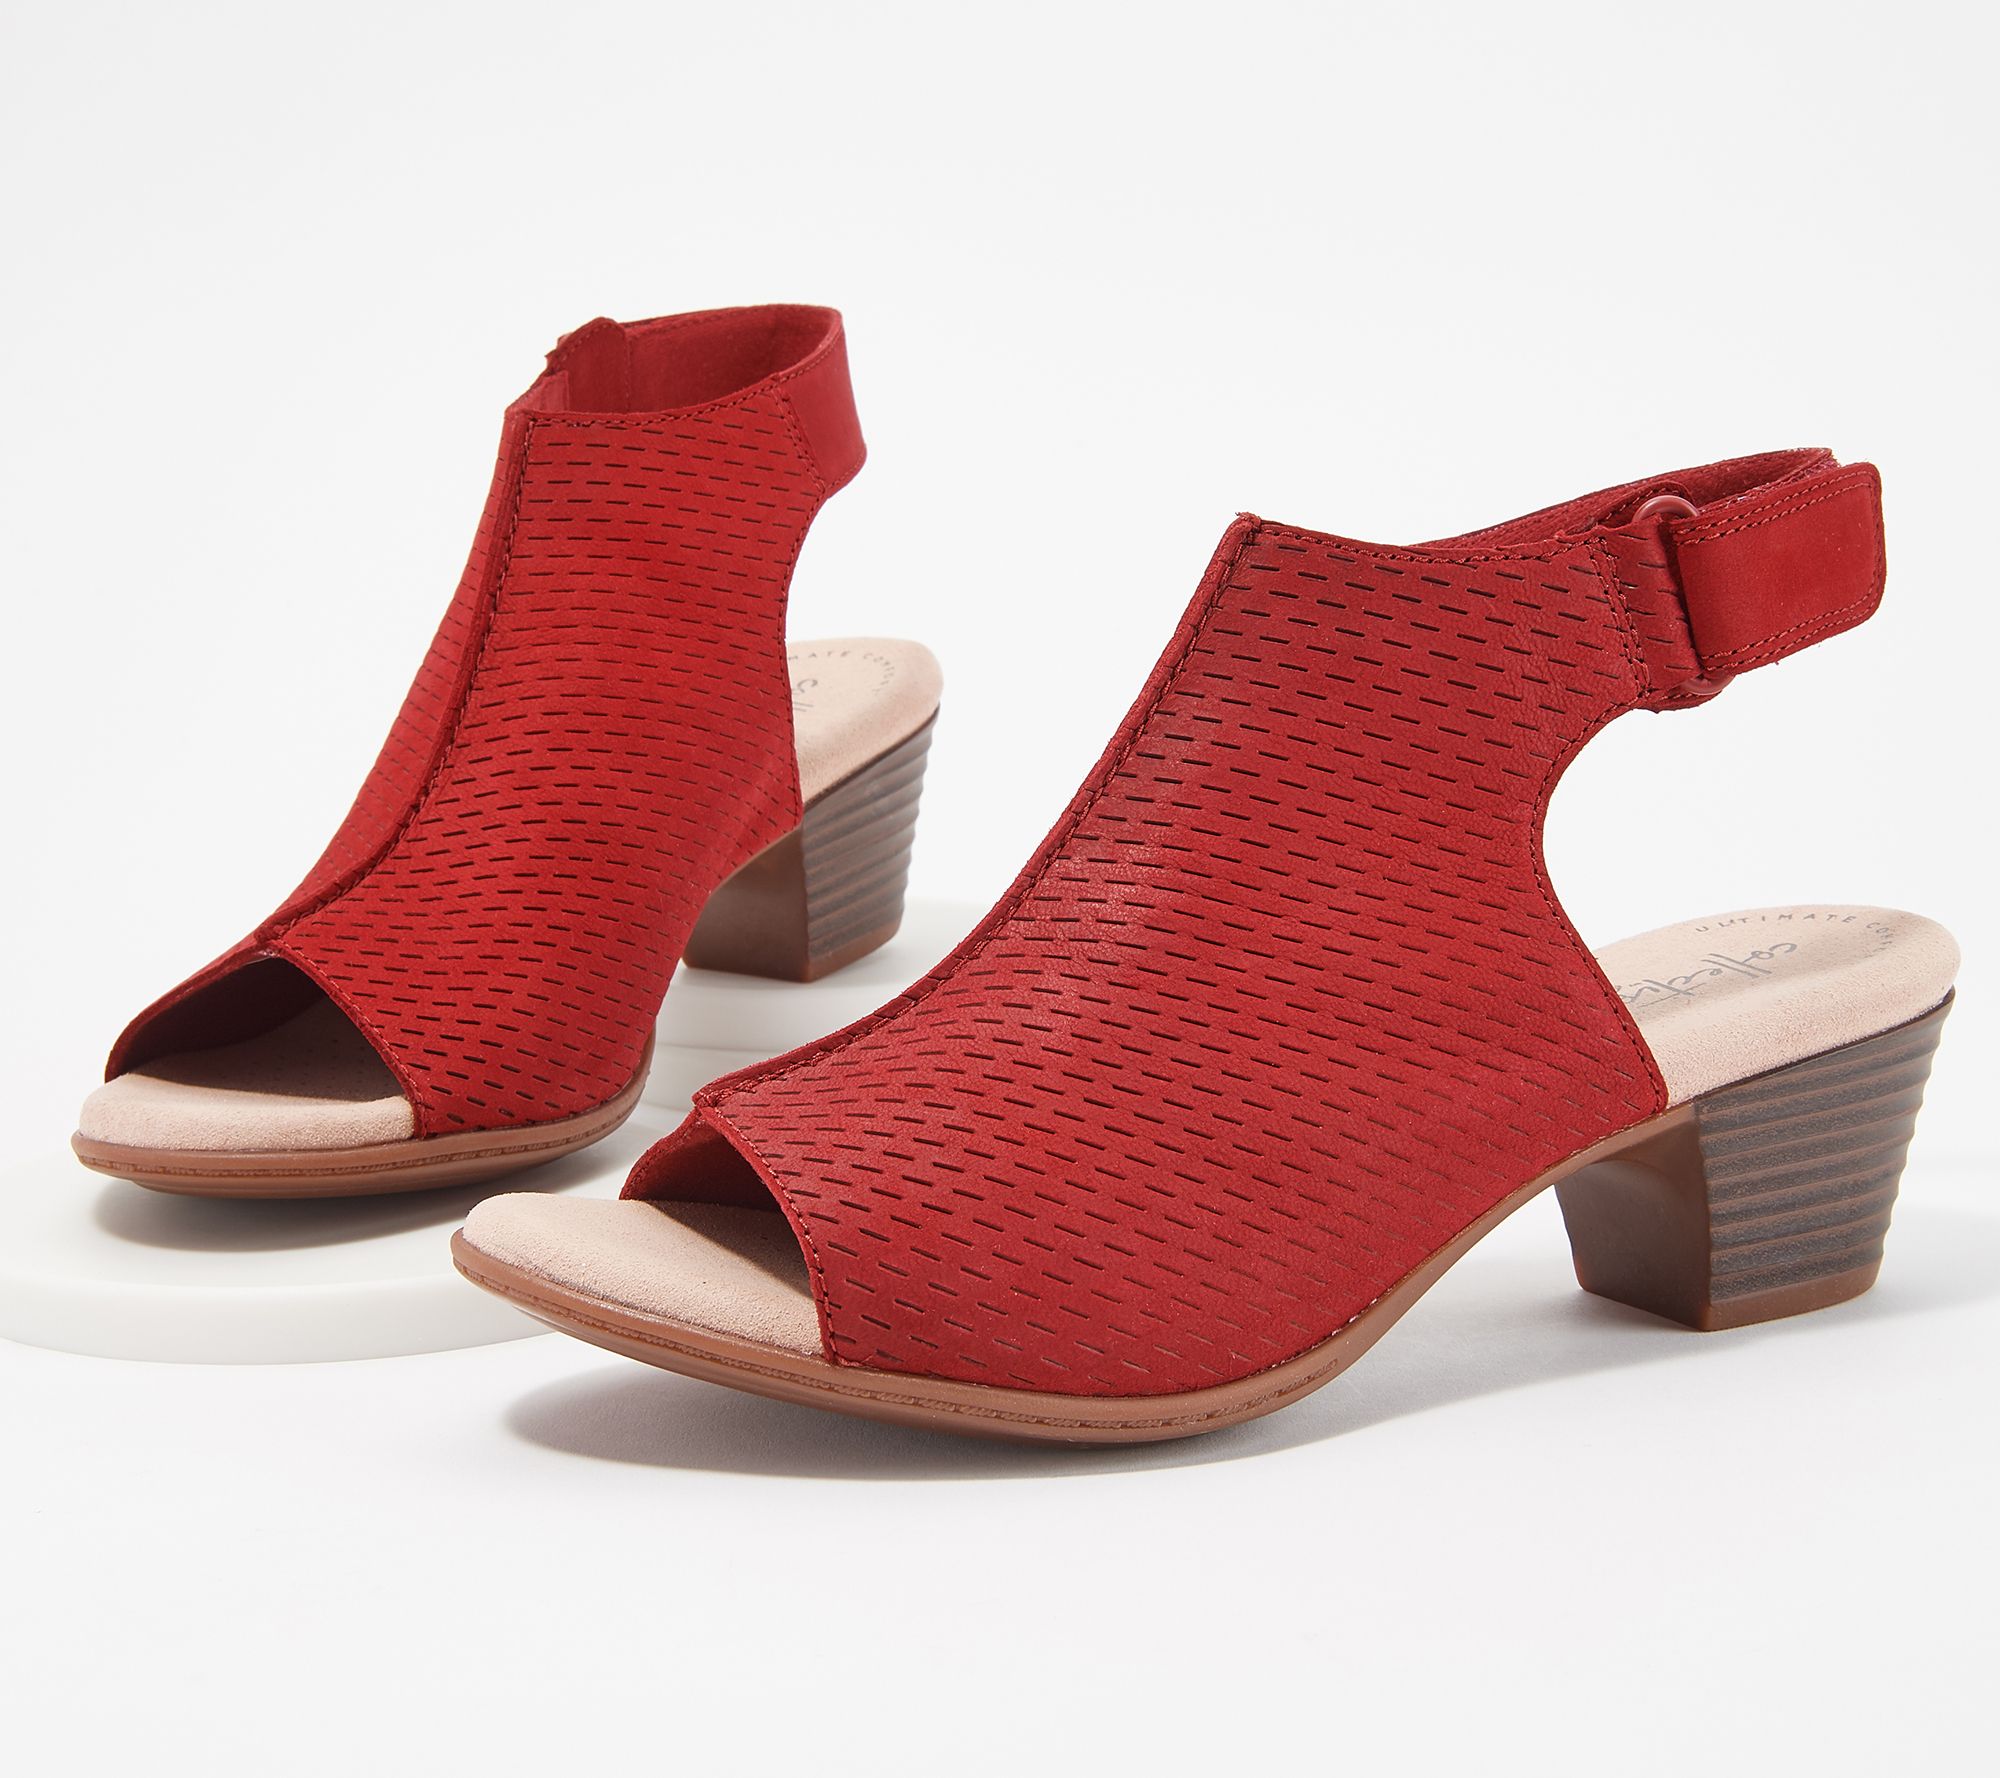 Clarks Collection Heeled Sandals- Valarie James - QVC.com